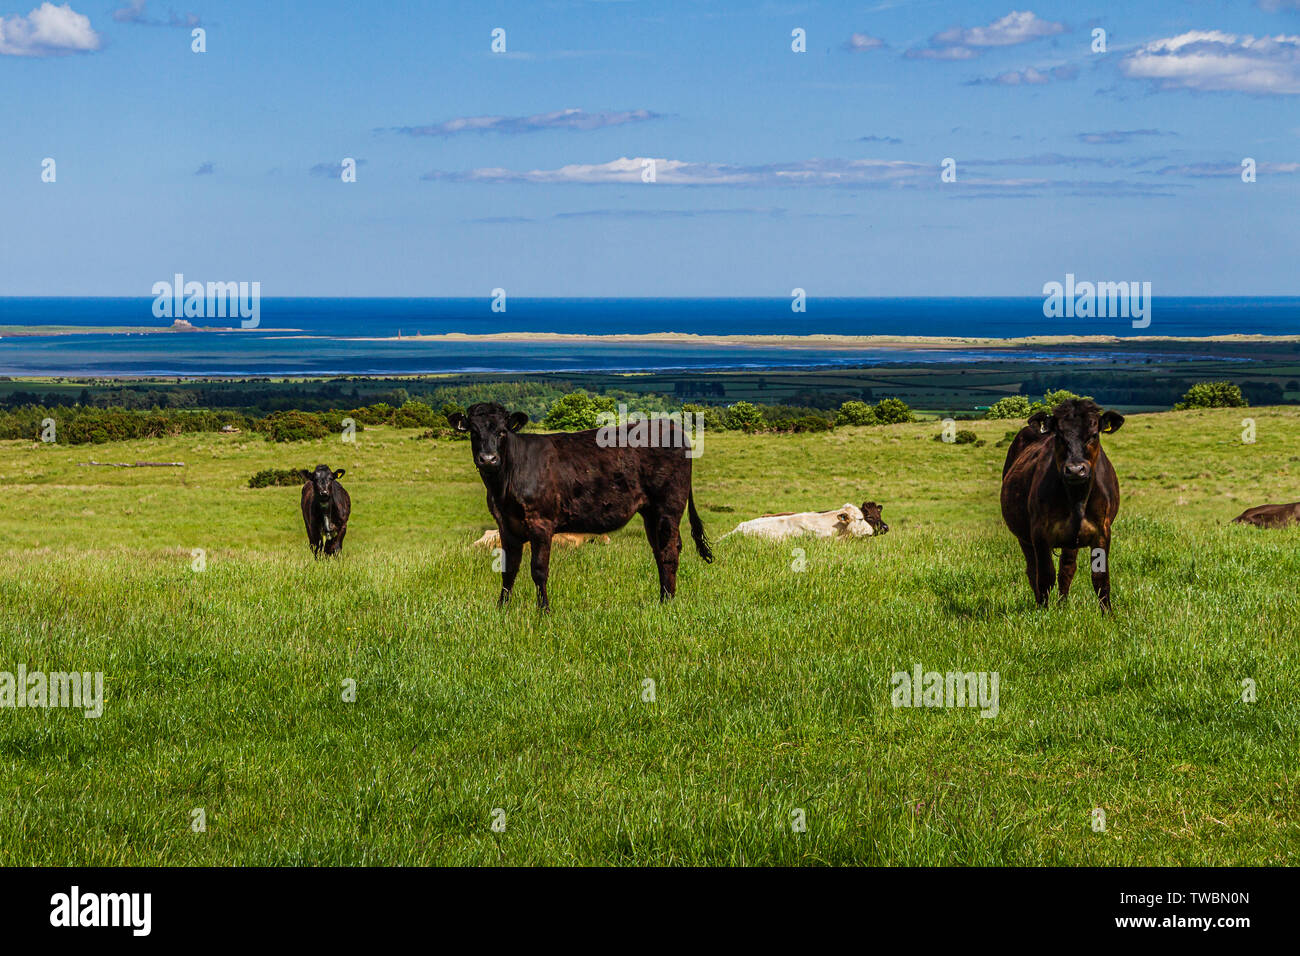 Cows in a grassy field with the Northumbrian coastline including Holy Island beyond. Holburn, Northumberland, UK. June 2019. Stock Photo